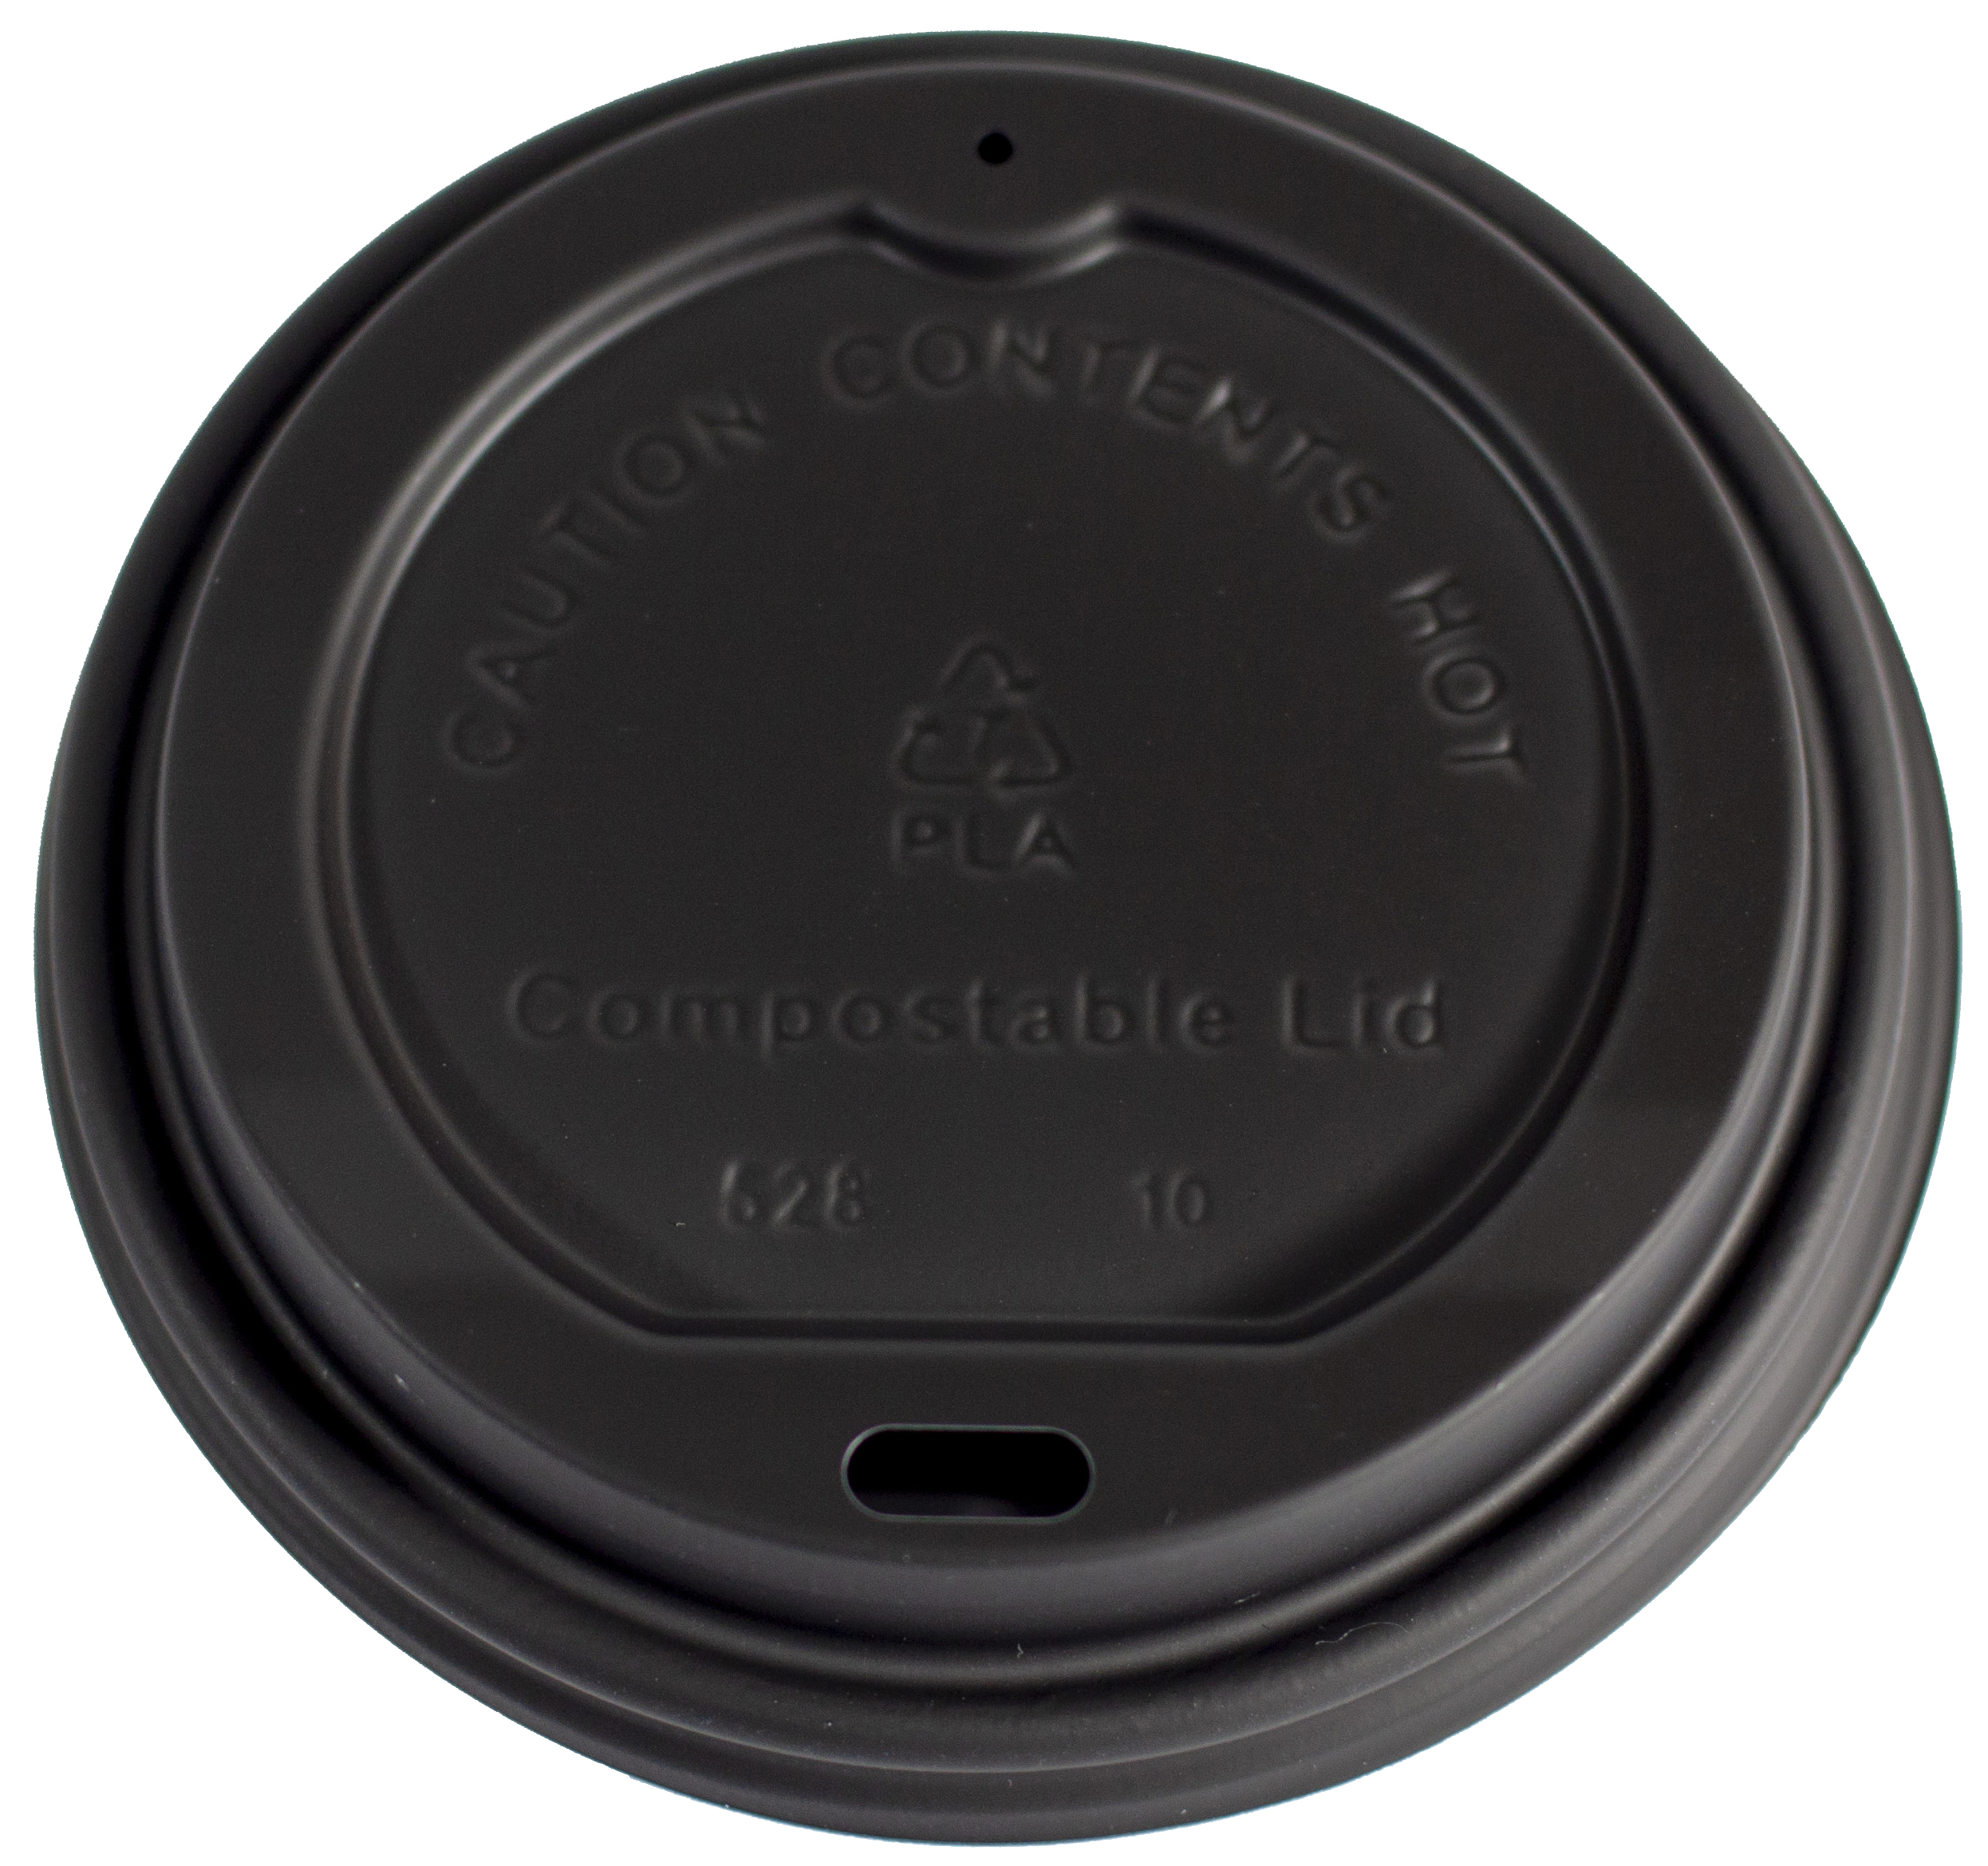 Hot Drinking Cup Lid CPLA Black 12/16oz